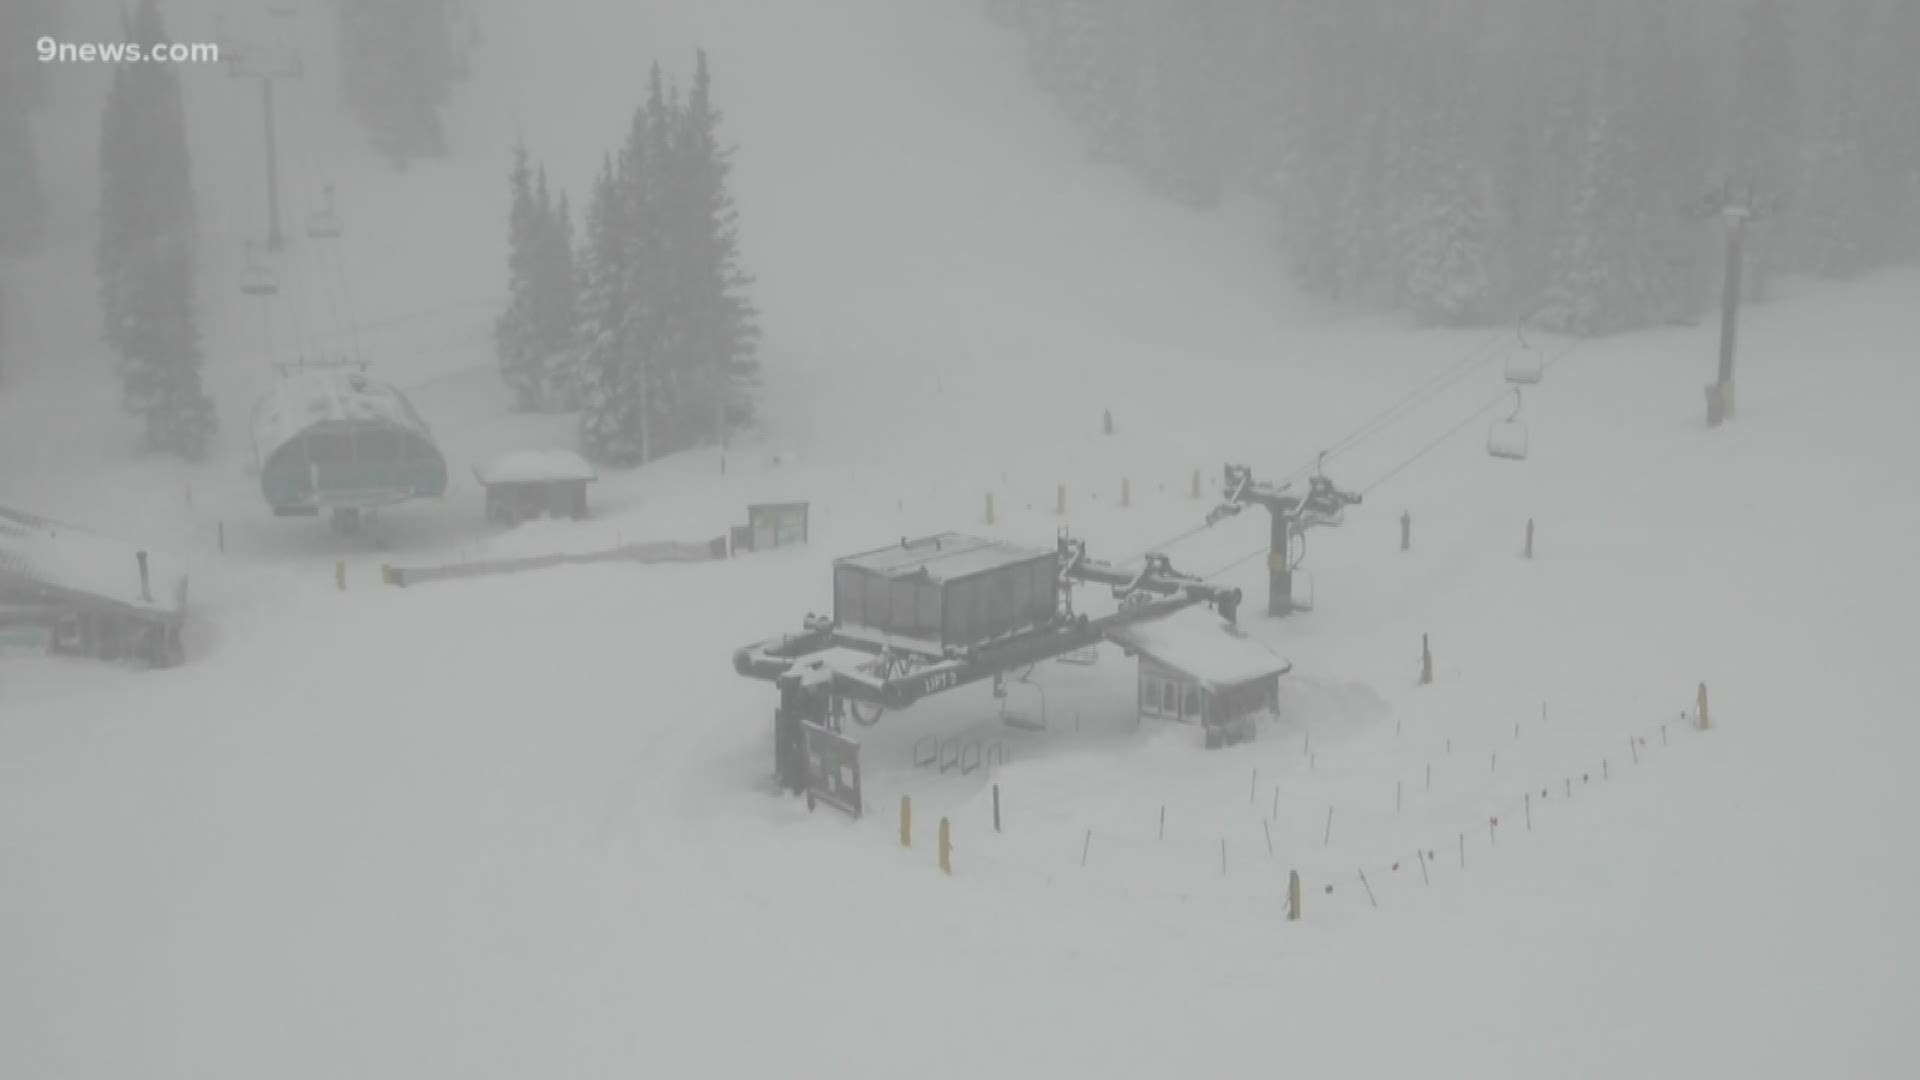 In a tweet, Loveland Ski Area apologized to everyone who made the drive up to the mountain.